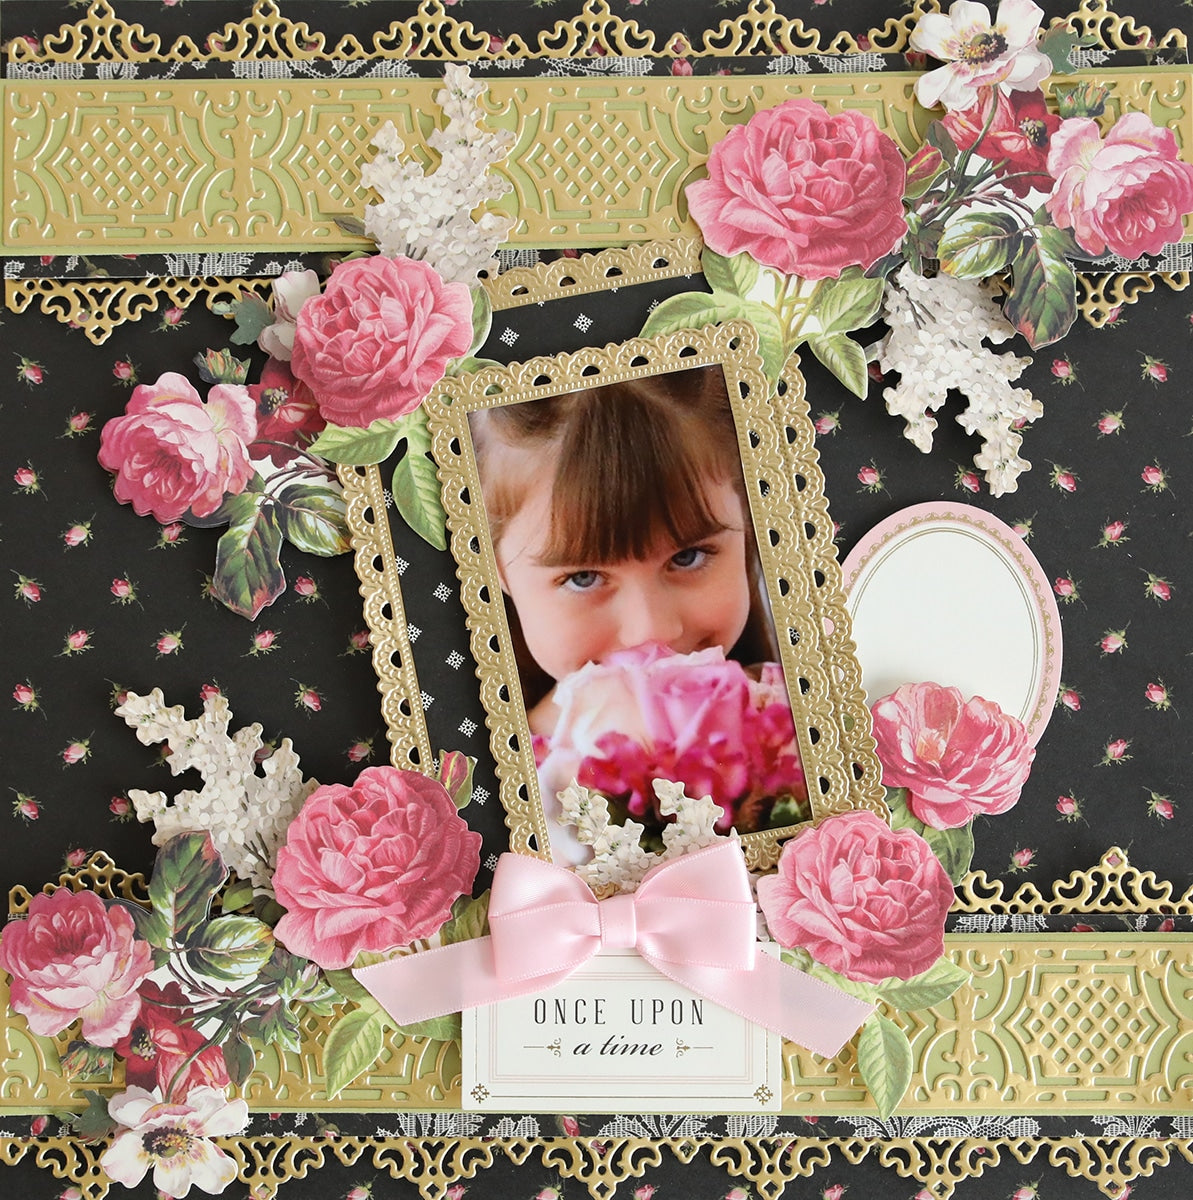 Anna Griffin Annalise Card Stock and Embellishments